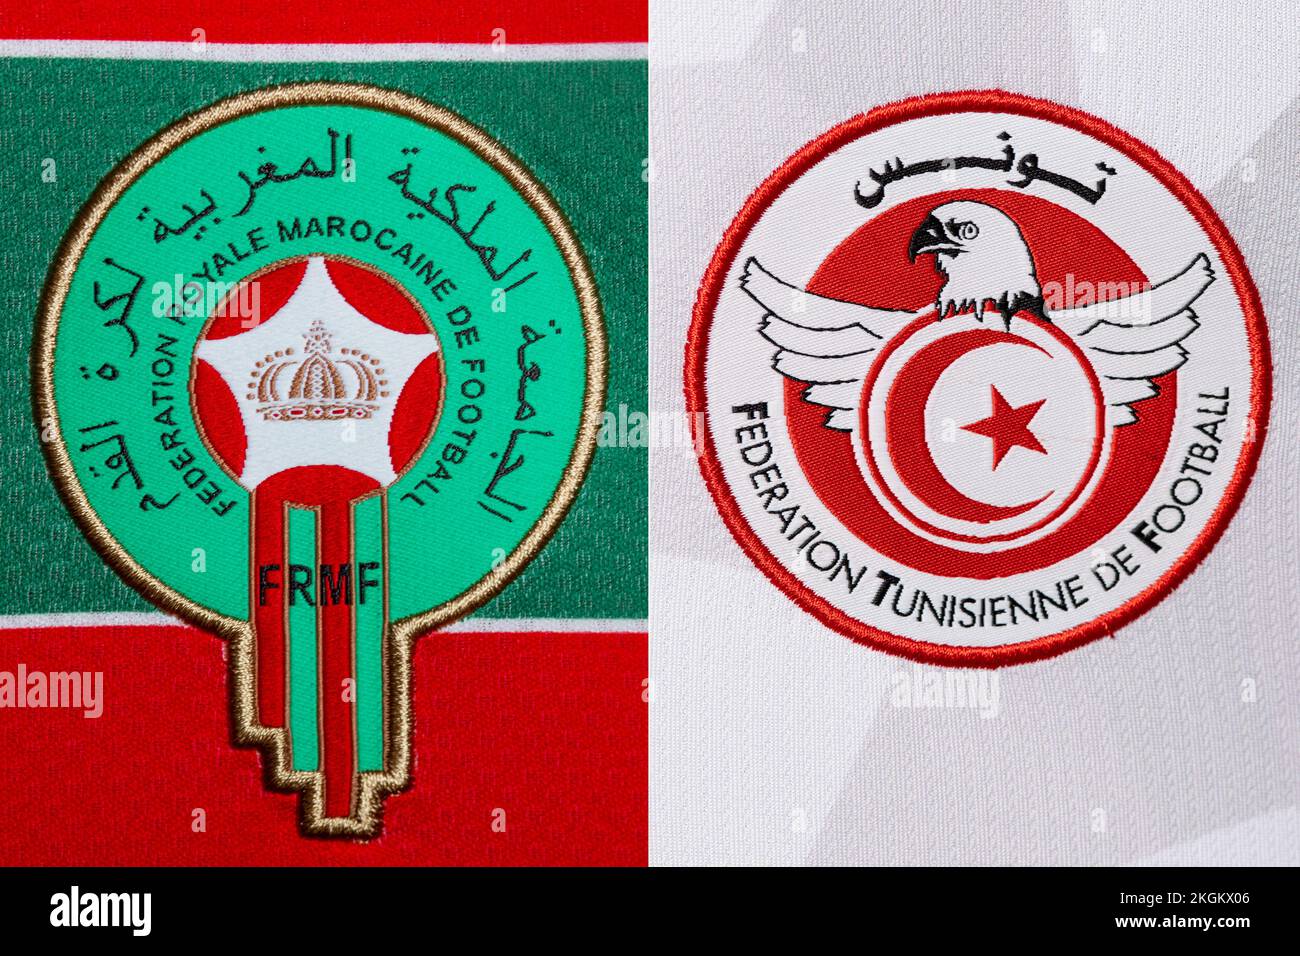 Close up of National Football team crest on home kit. FIFA World Cup Qatar 2022. Stock Photo